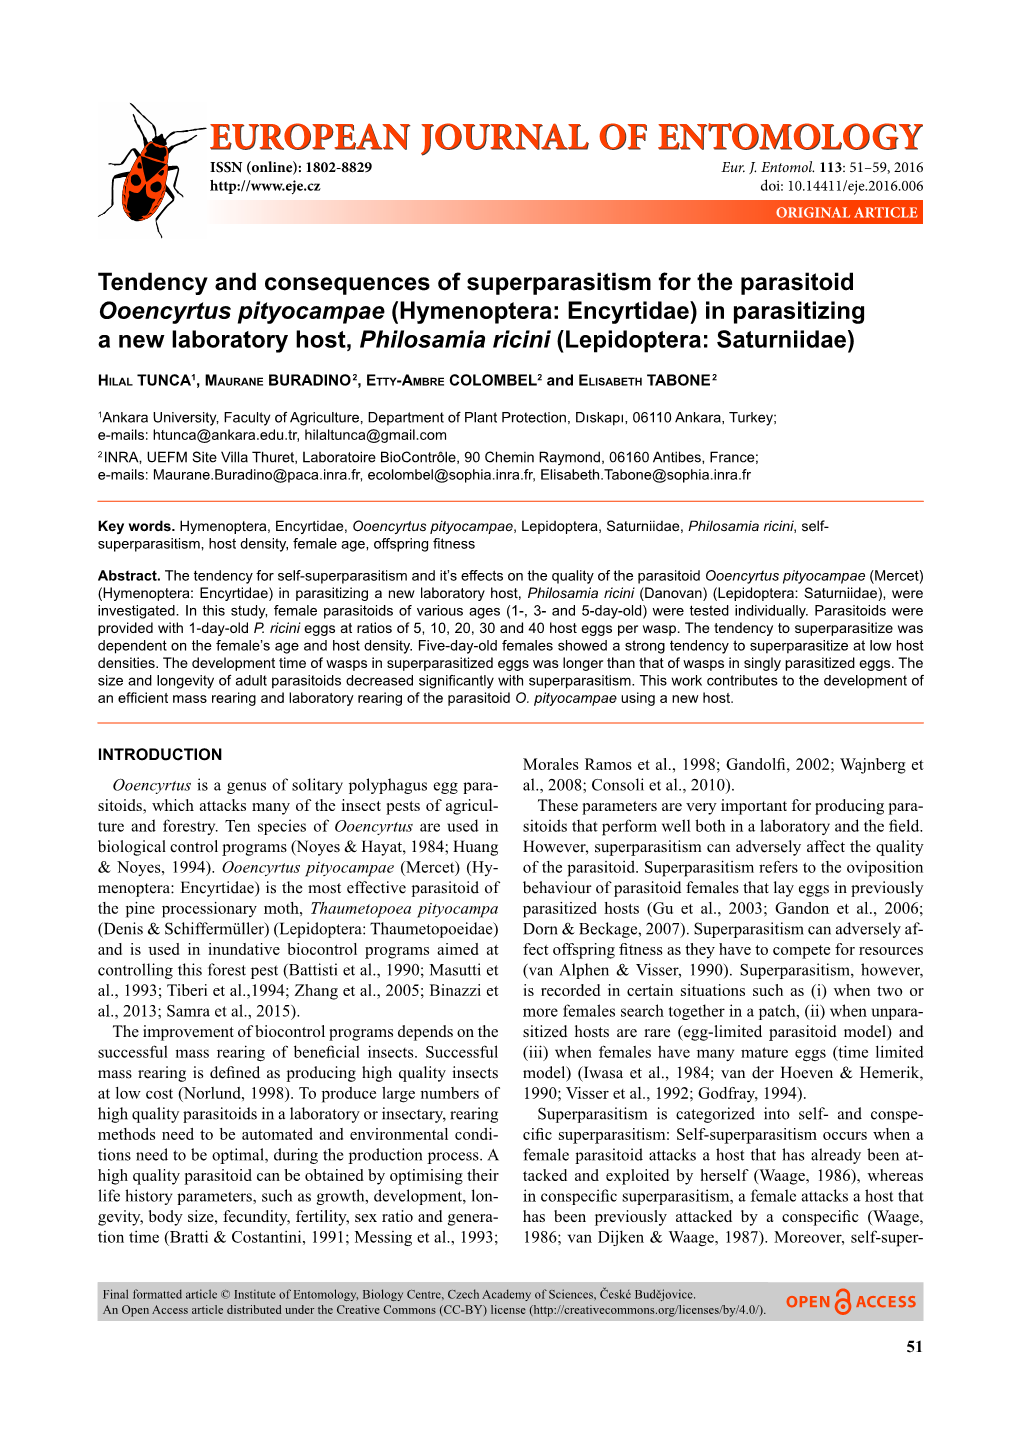 Tendency and Consequences of Superparasitism for the Parasitoid